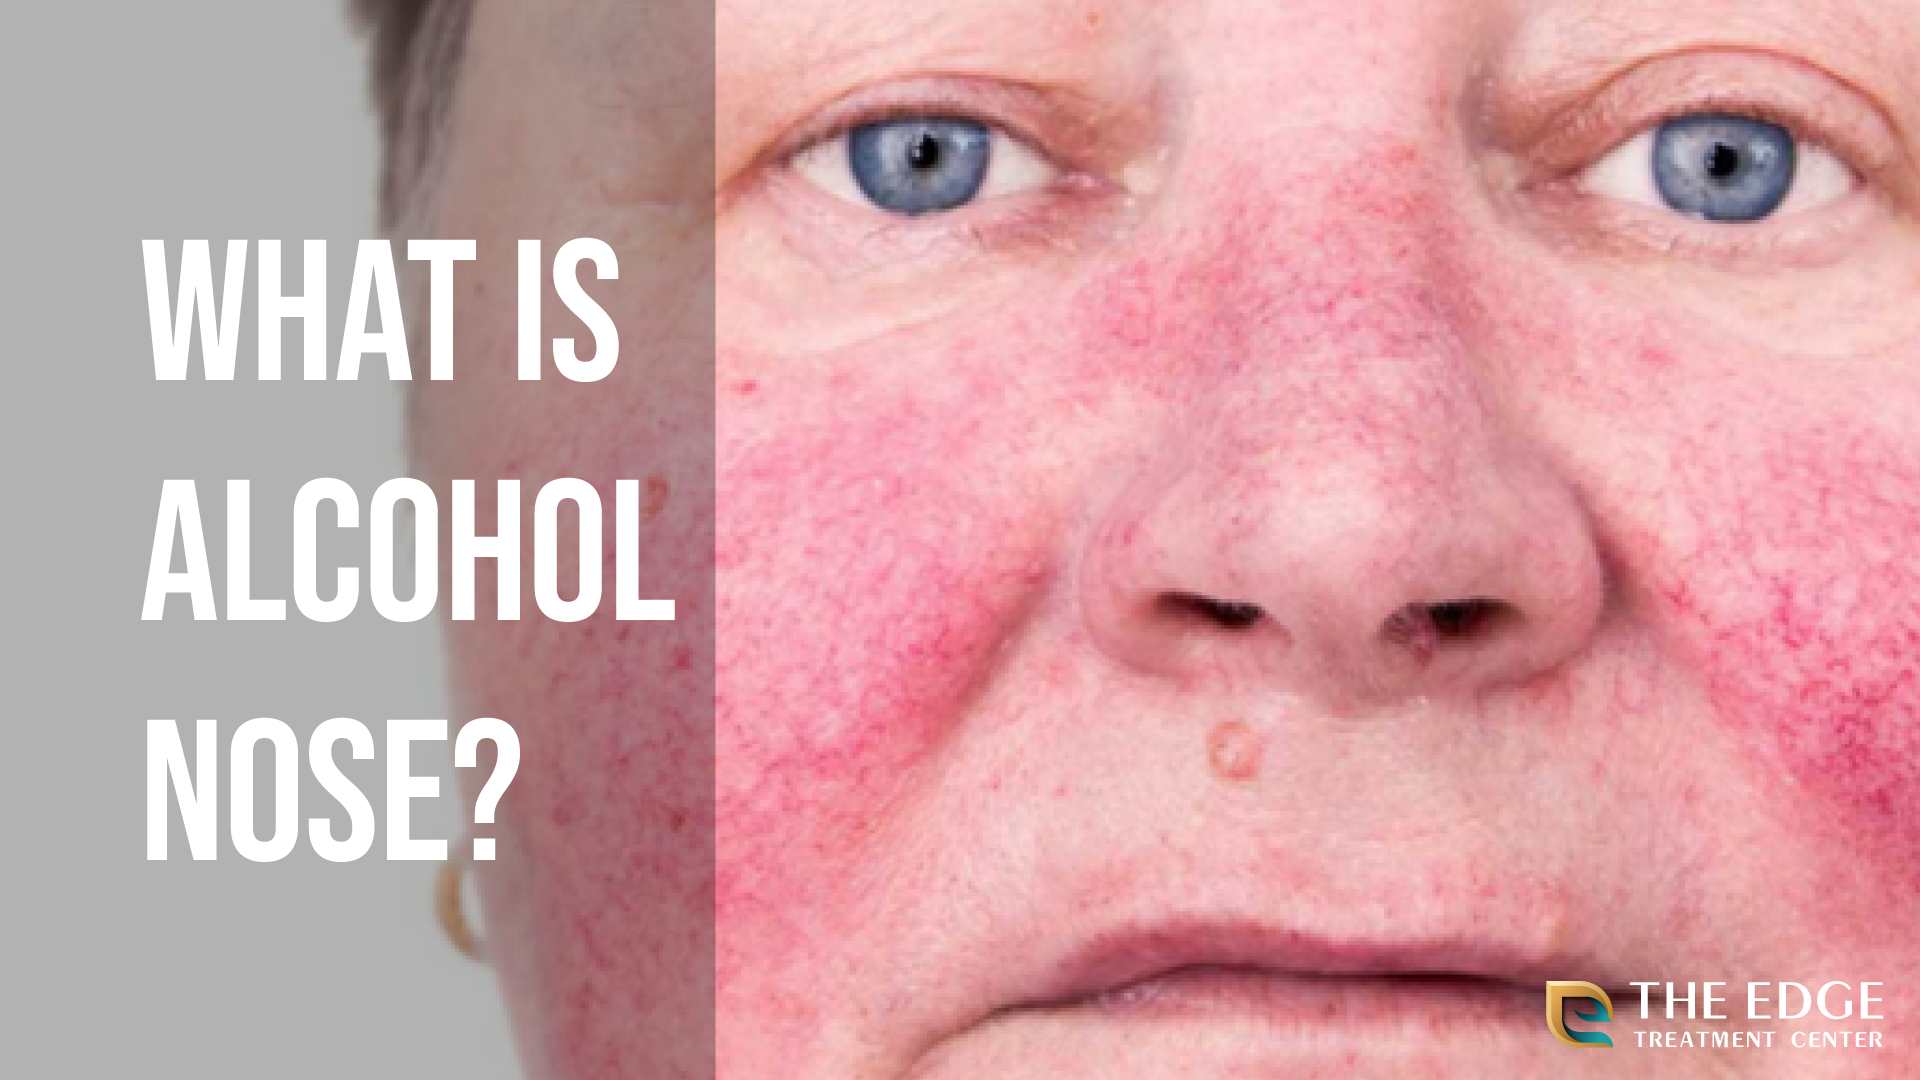 What Is Alcoholic Nose?